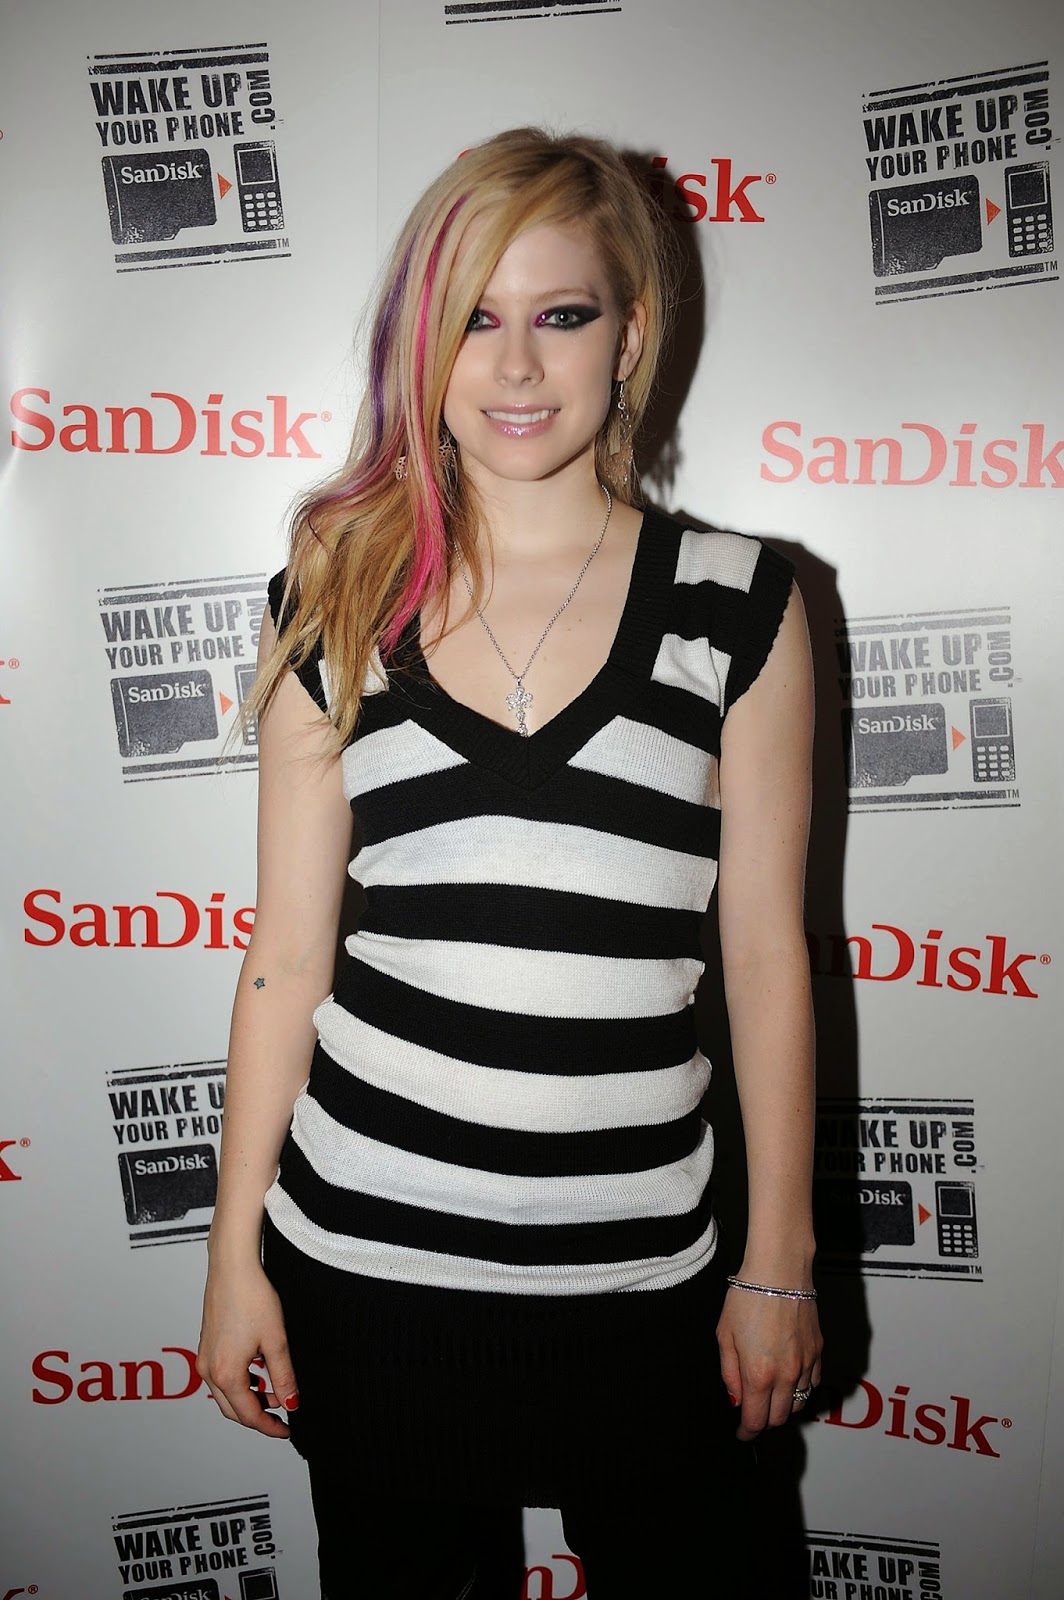 Avril Lavigne Wallpapers Free Download